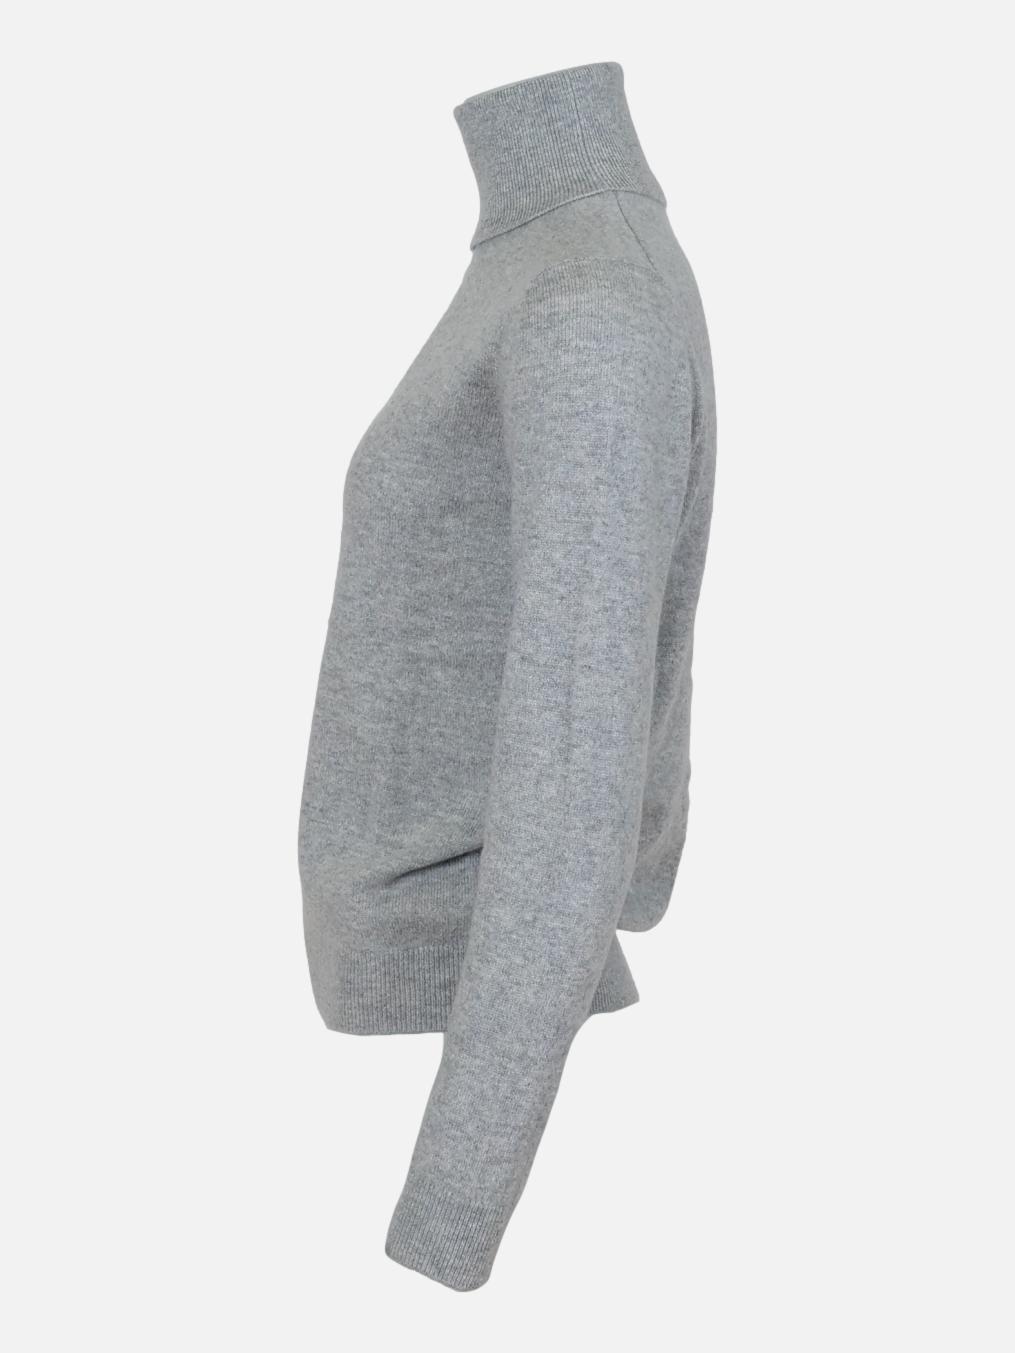 SY-23031 Turtleneck - 100% Cashmere - Accesories - Grey